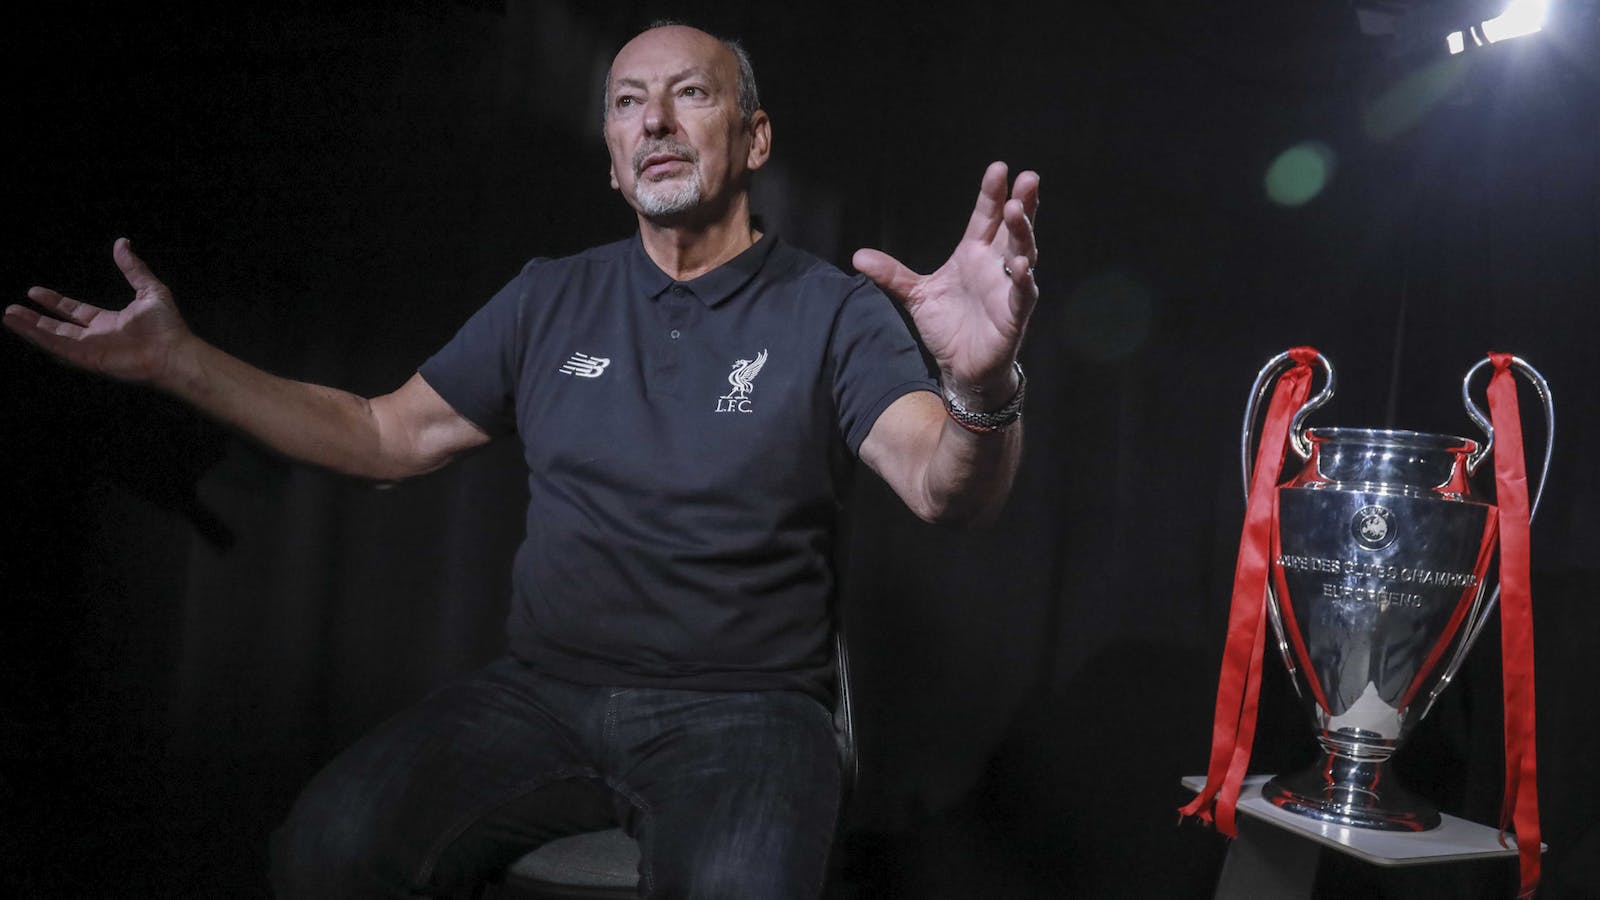 Peter Moore pictured with Liverpool FC's 2019 Champions League trophy. Photo: AP.